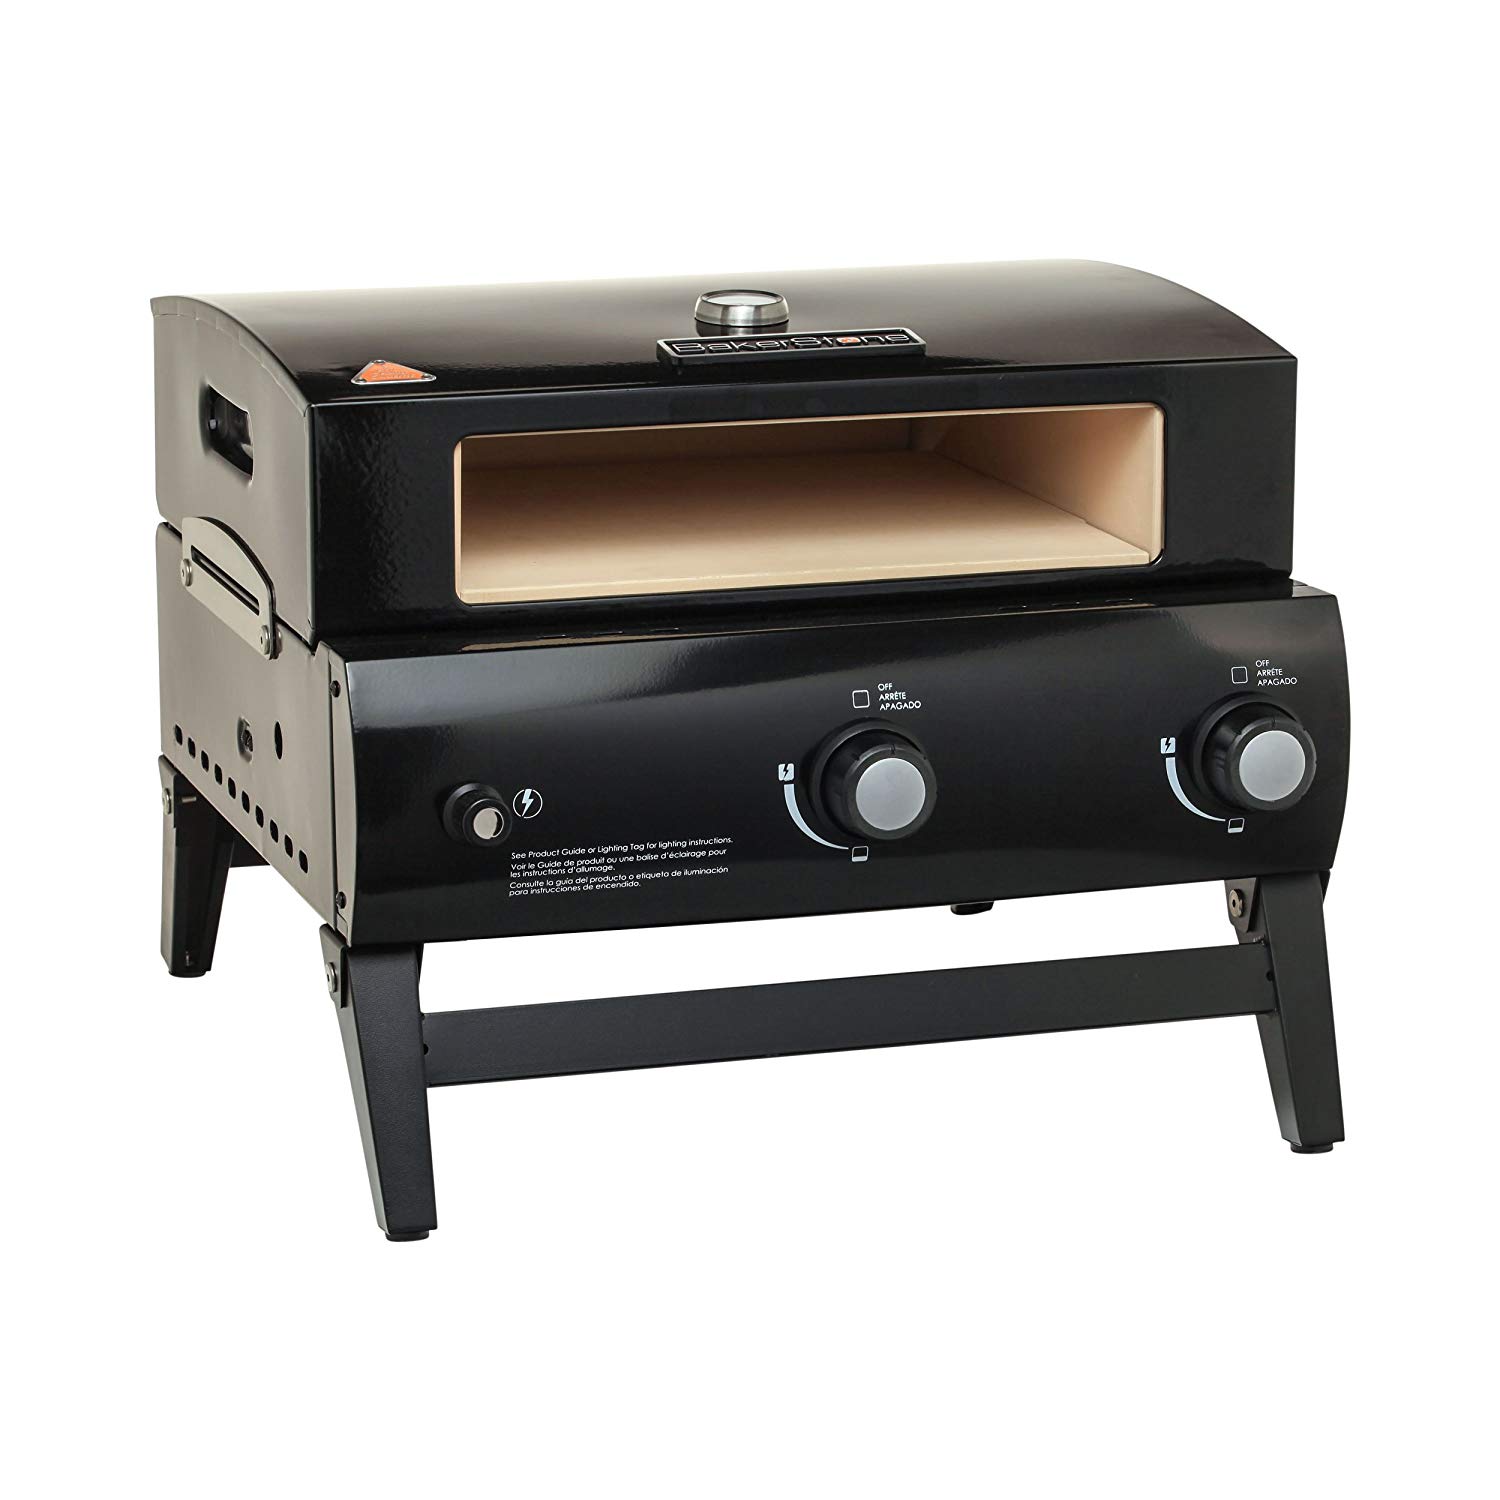 BakerStone Original Series Portable Gas Pizza Oven - image 1 of 3